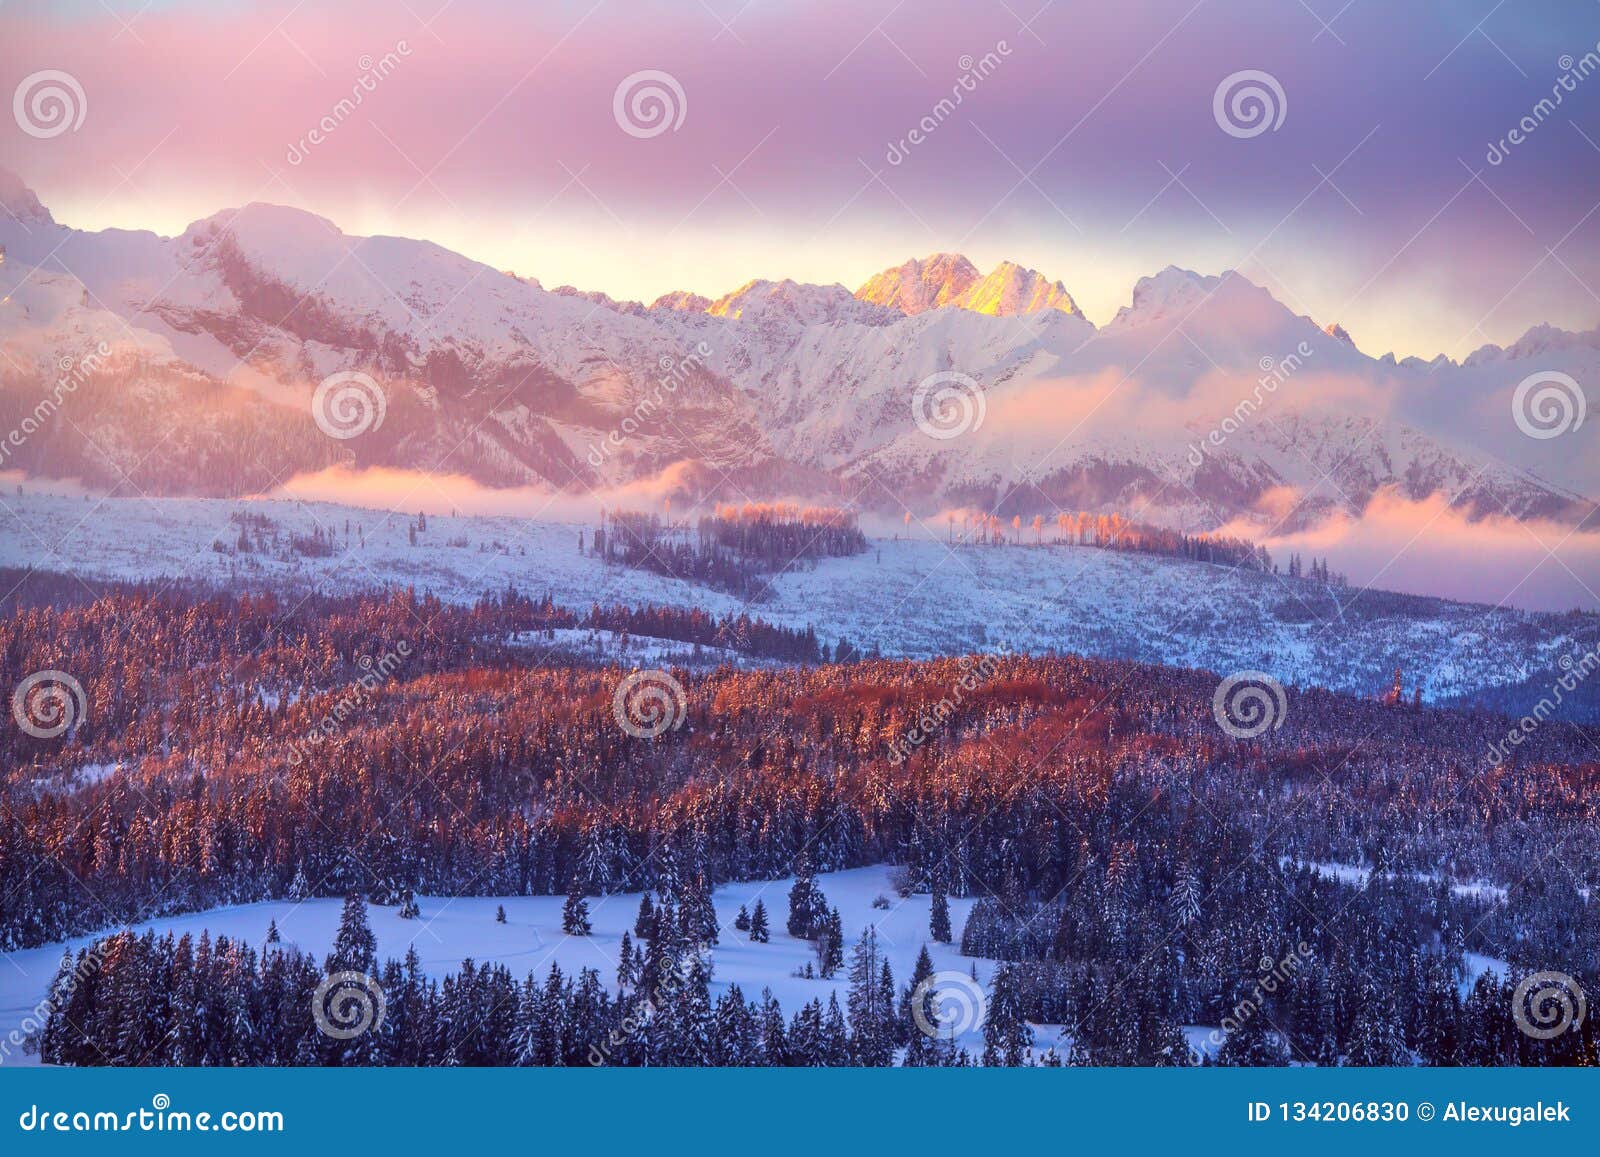 winter mountains. beautiful landscape with snowy summits in pink morning sunlight.